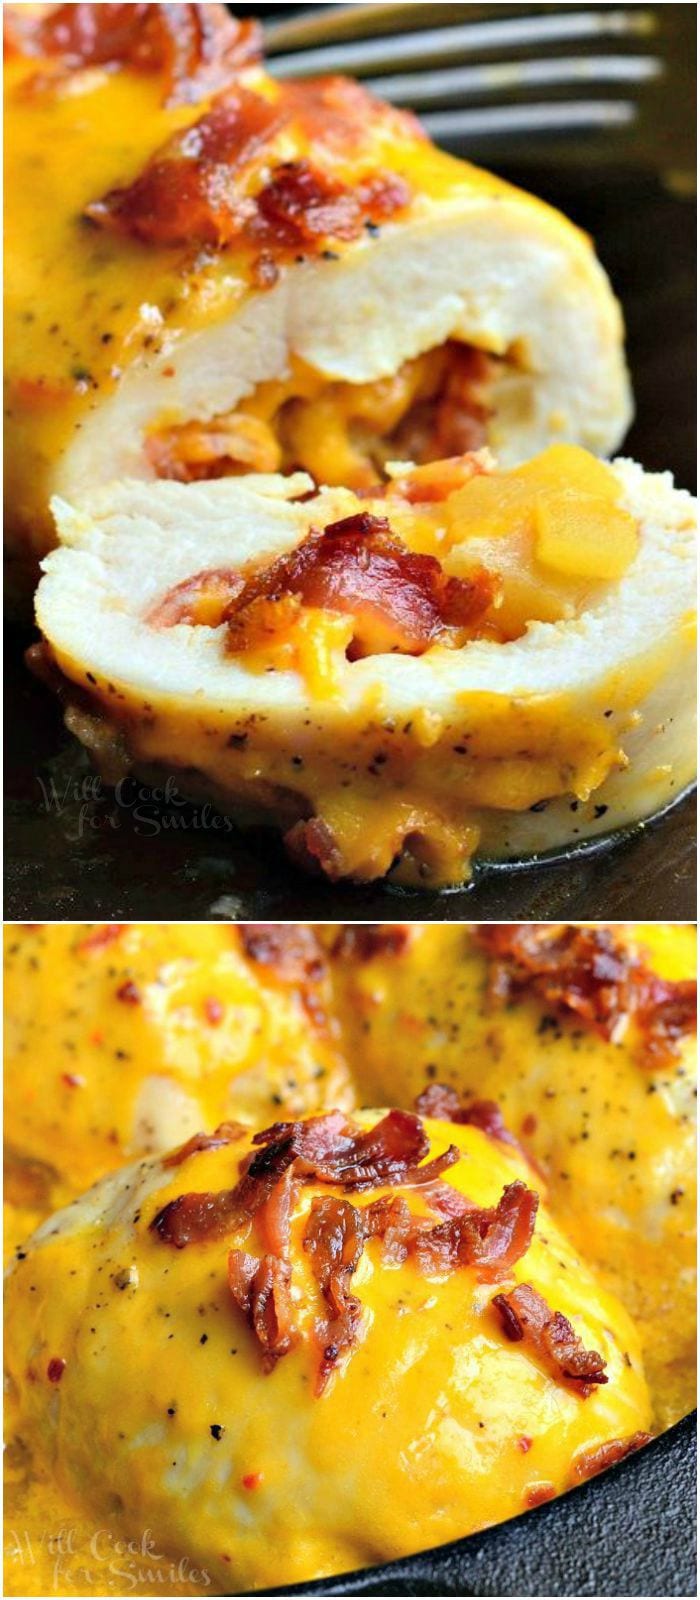 Two photos: top photo is sliced chicken breast that's been stuffed with apples, bacon, and cheese. Melted cheese and bacon appear on top of the remaining chicken breast. Bottom photo is Apple Bacon Cheddar Stuffed Chicken breasts in a black skillet covered in melted cheese and bacon.